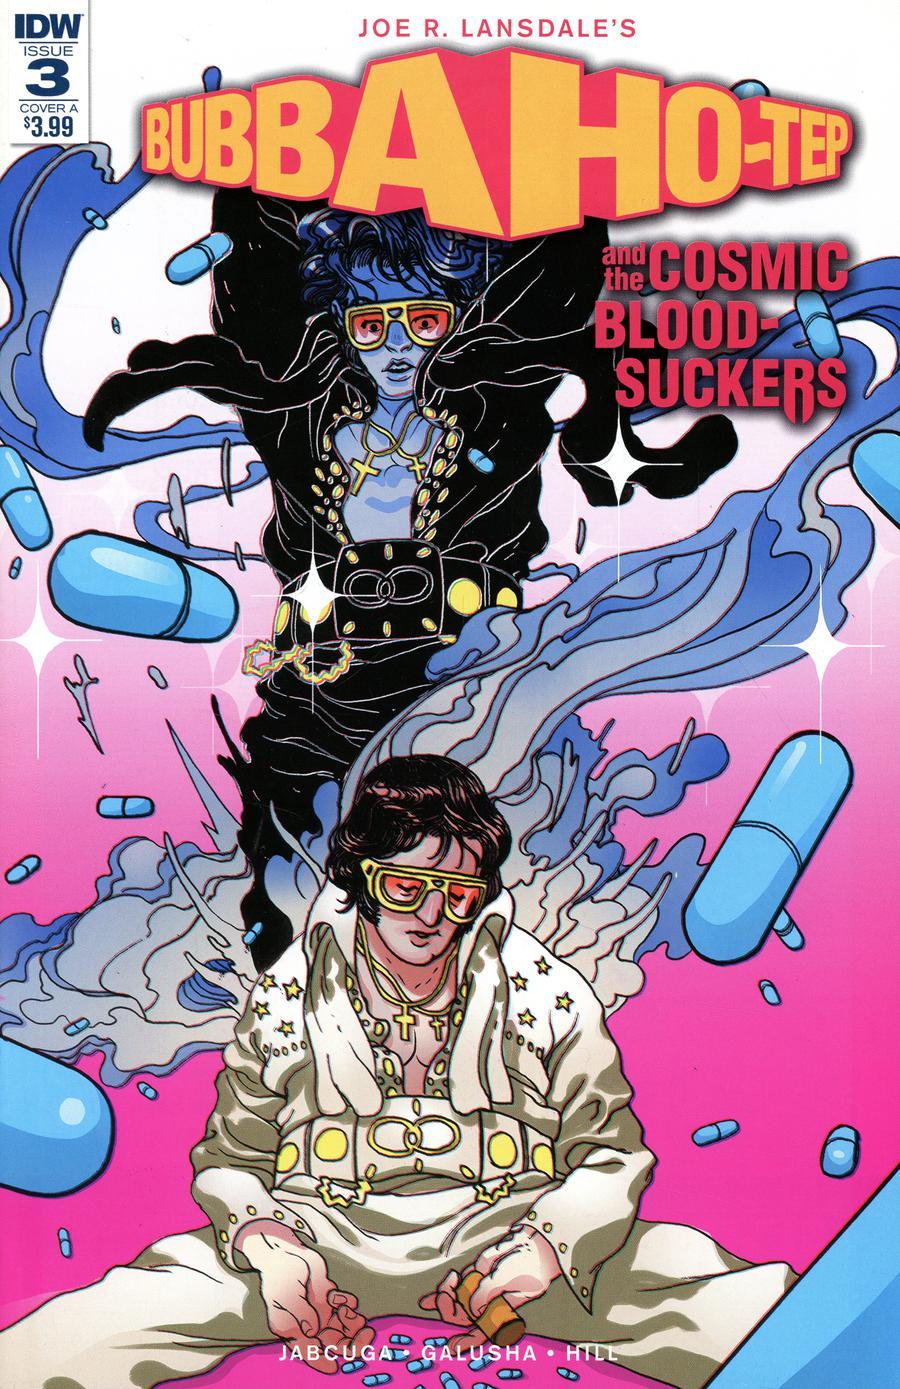 Bubba Ho-Tep And The Cosmic Blood-Suckers Vol. 1 #3